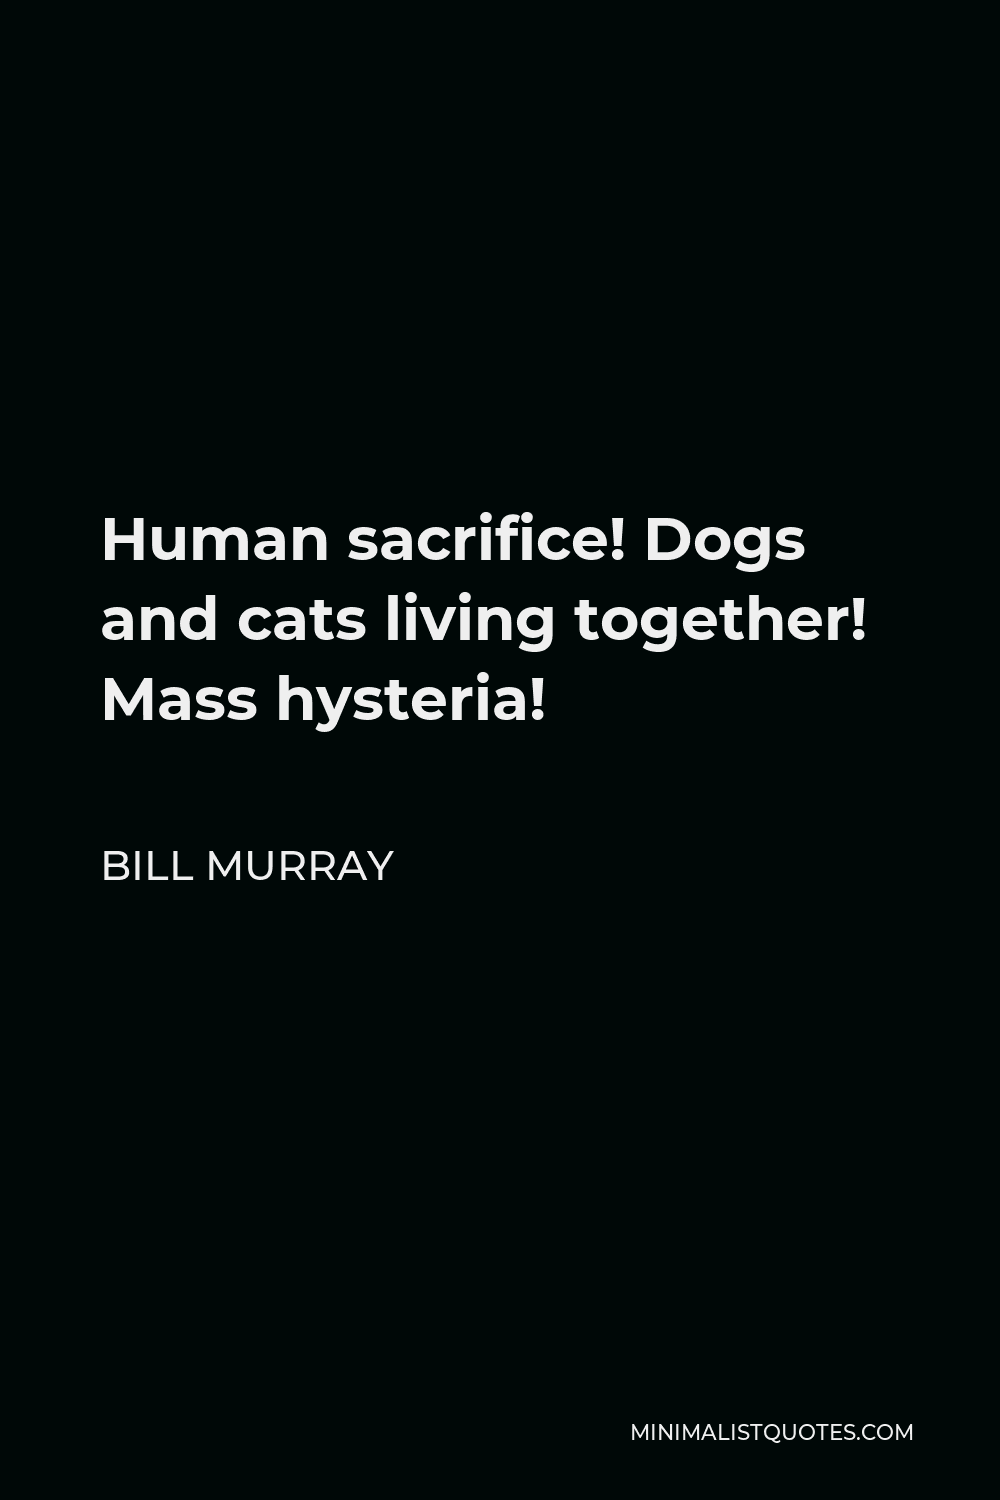 Bill Murray Quote - Human sacrifice! Dogs and cats living together! Mass hysteria!